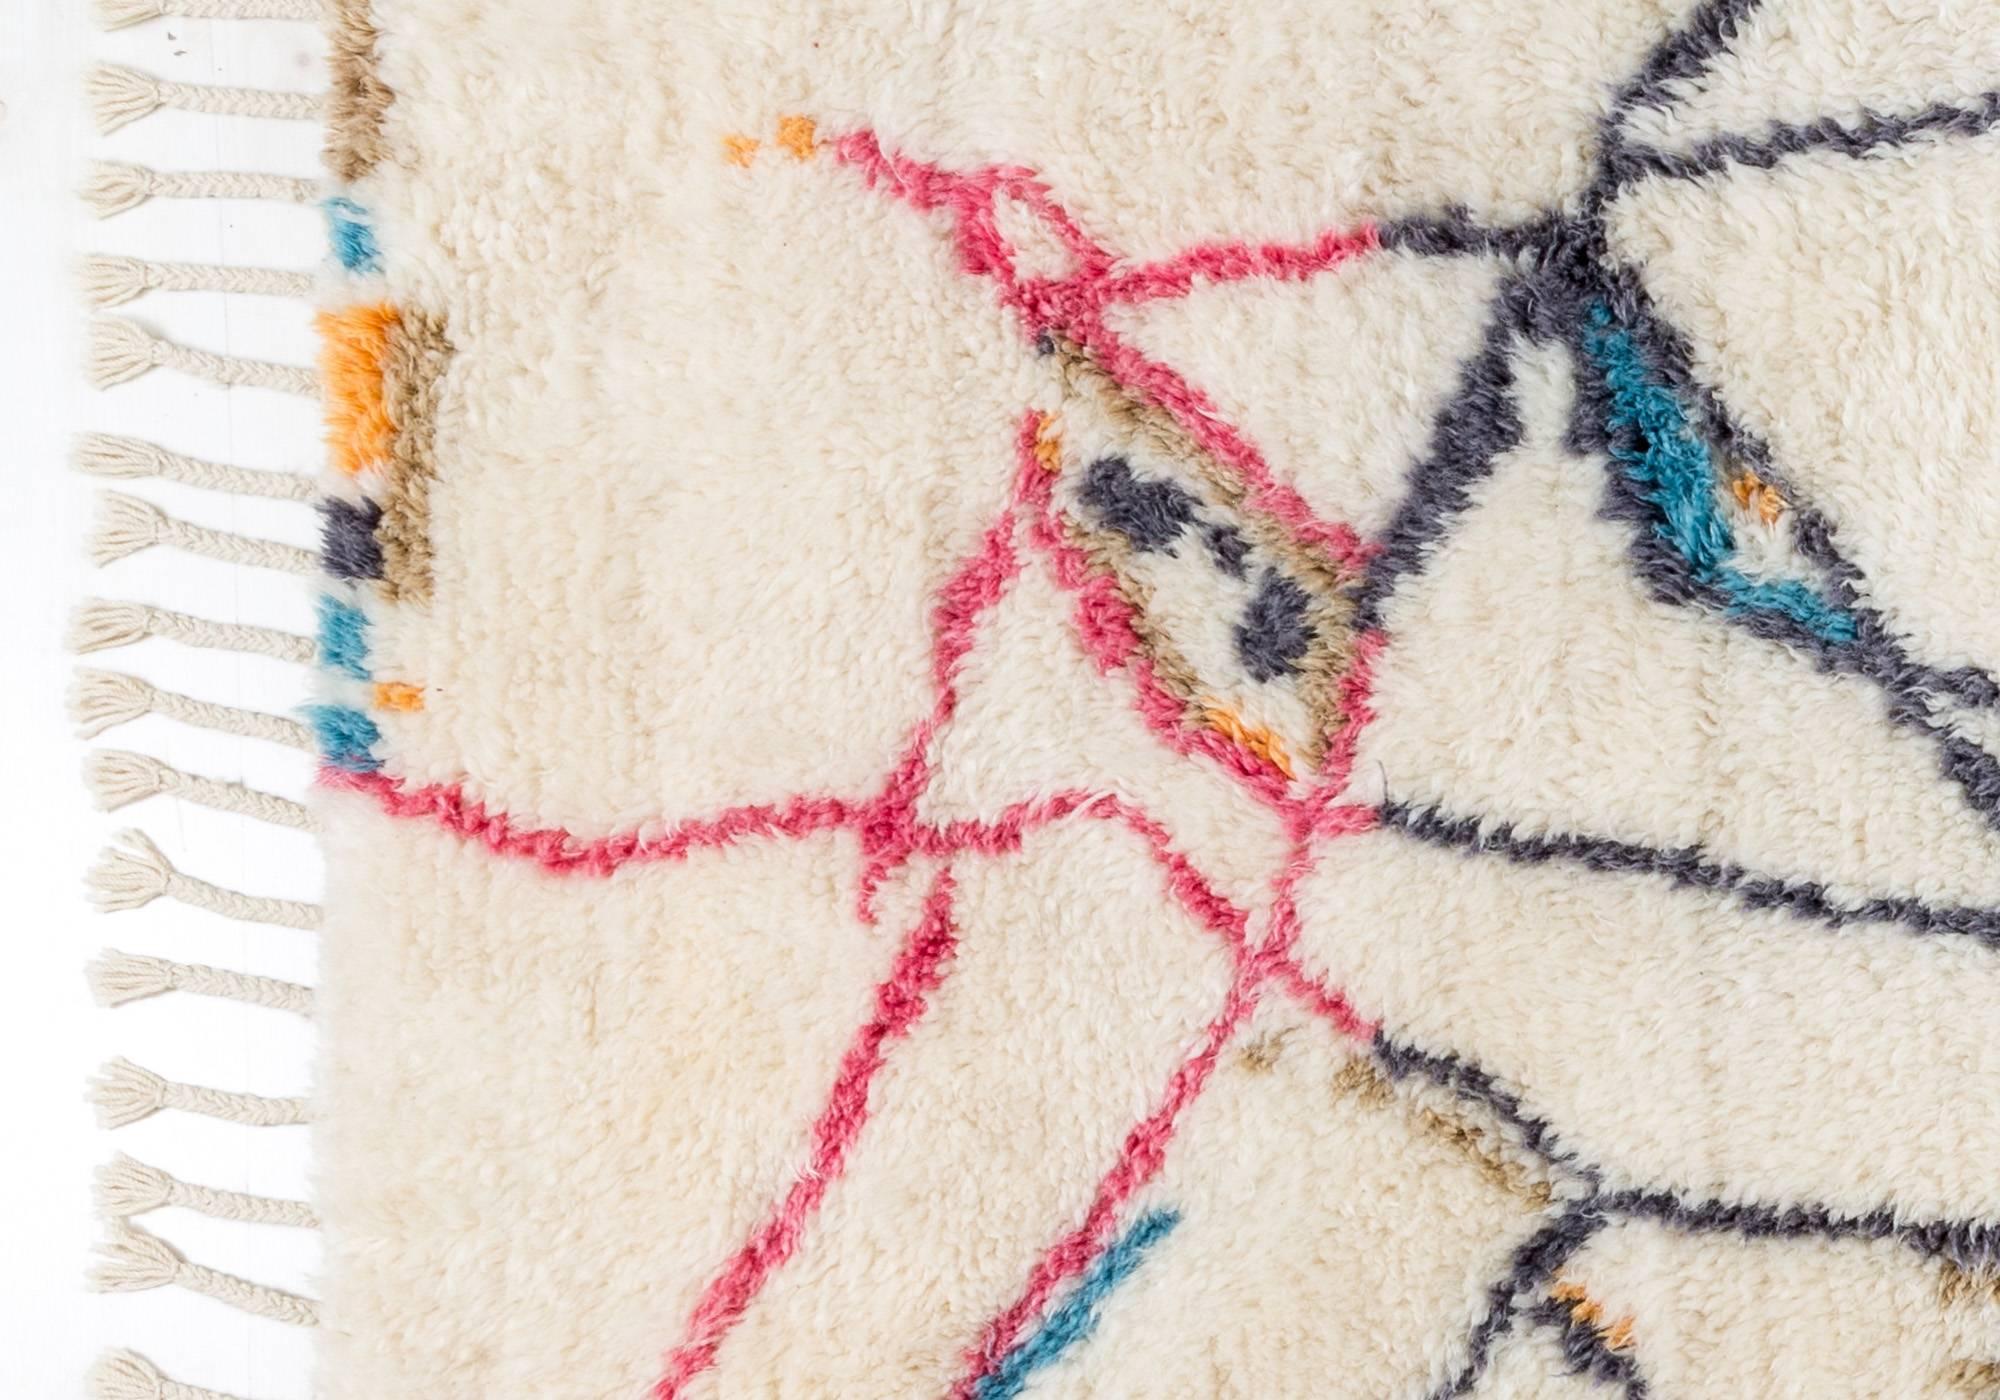 Post-Modern Moroccan Inspired Knot Rug Limited Edition 